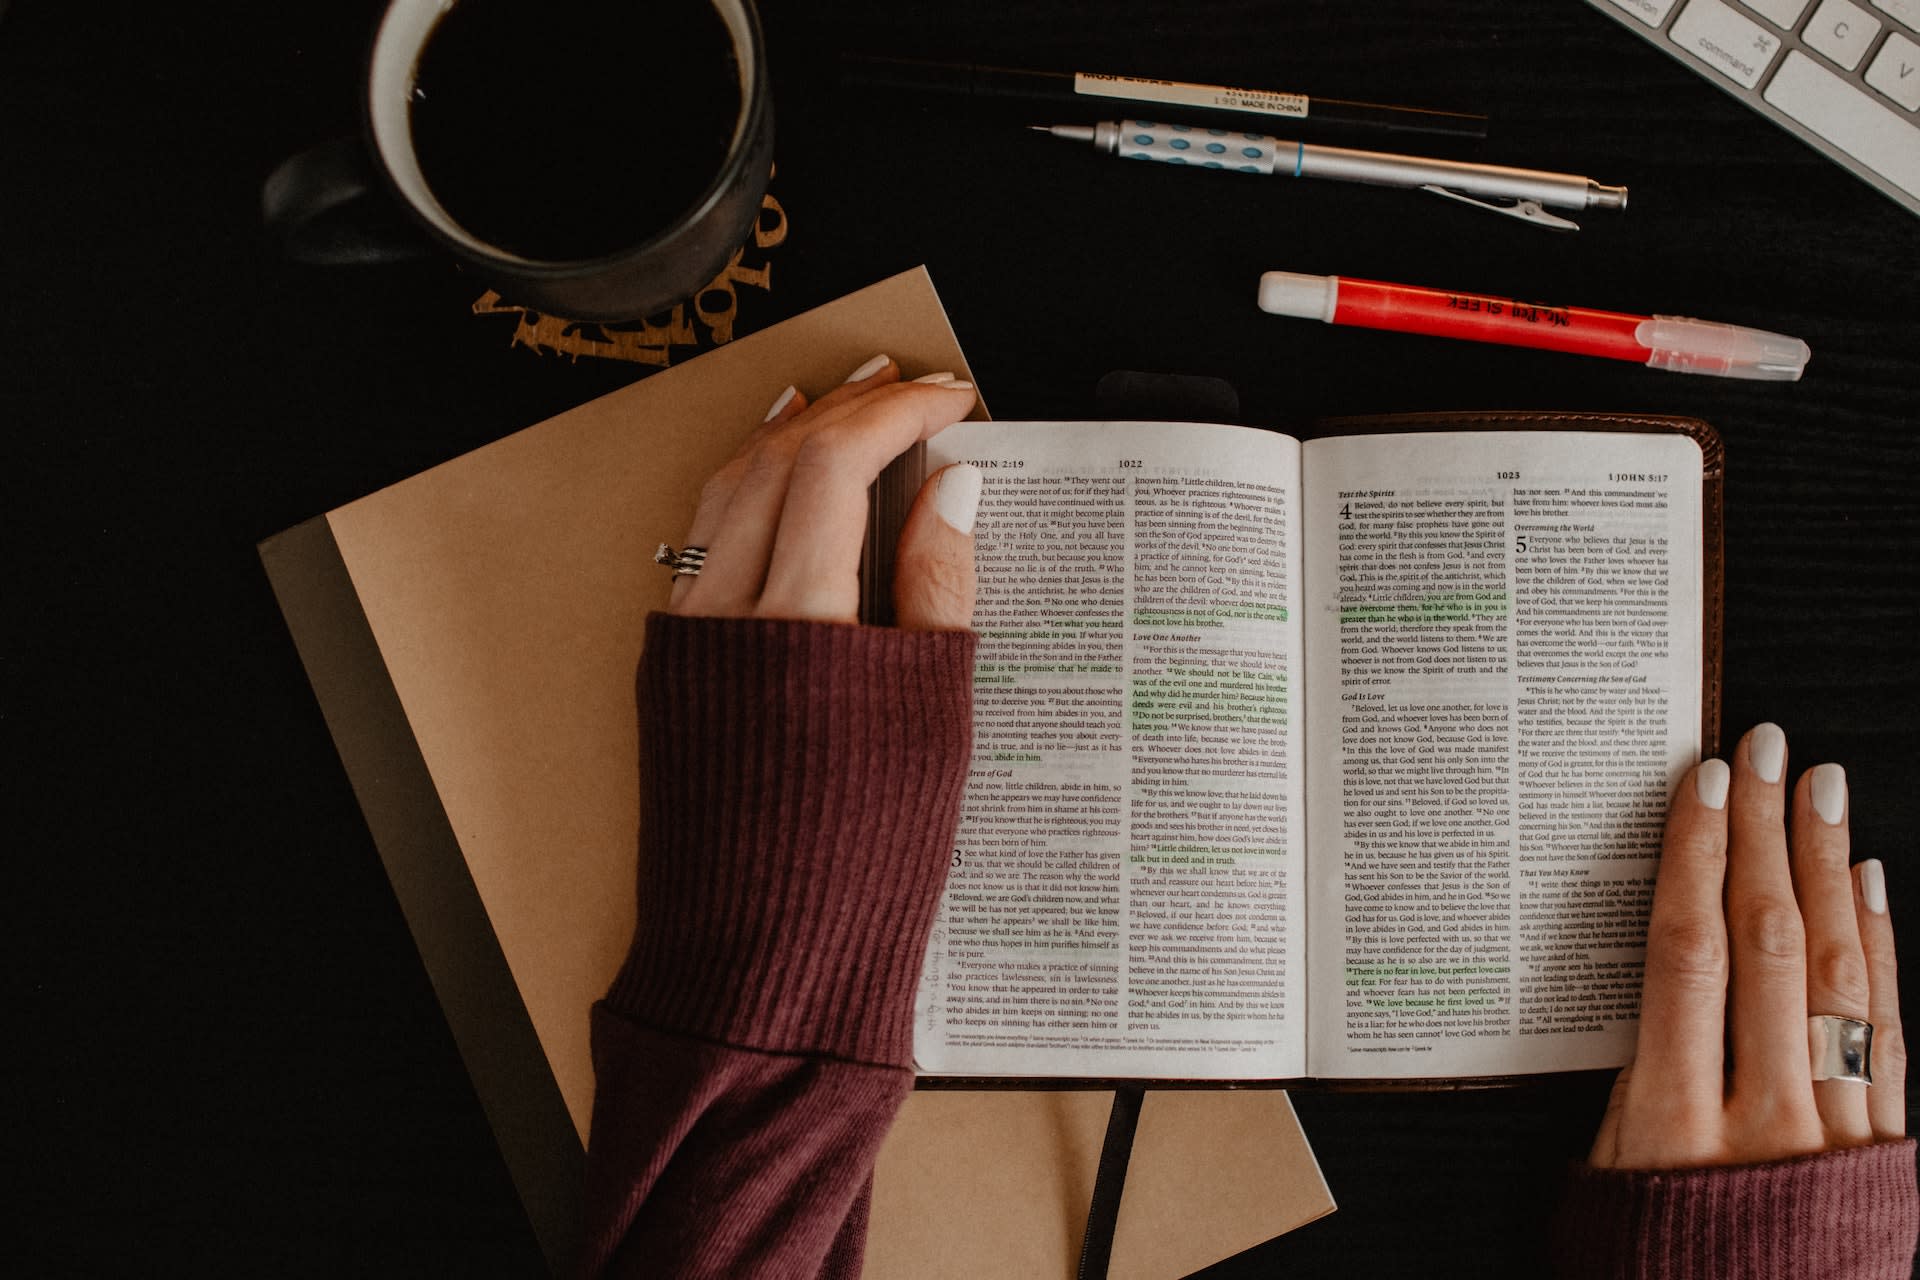 A Bible open on a desk, surrounded by a full coffee mug, pens and a journal. A pair of hands holds the Bible open.